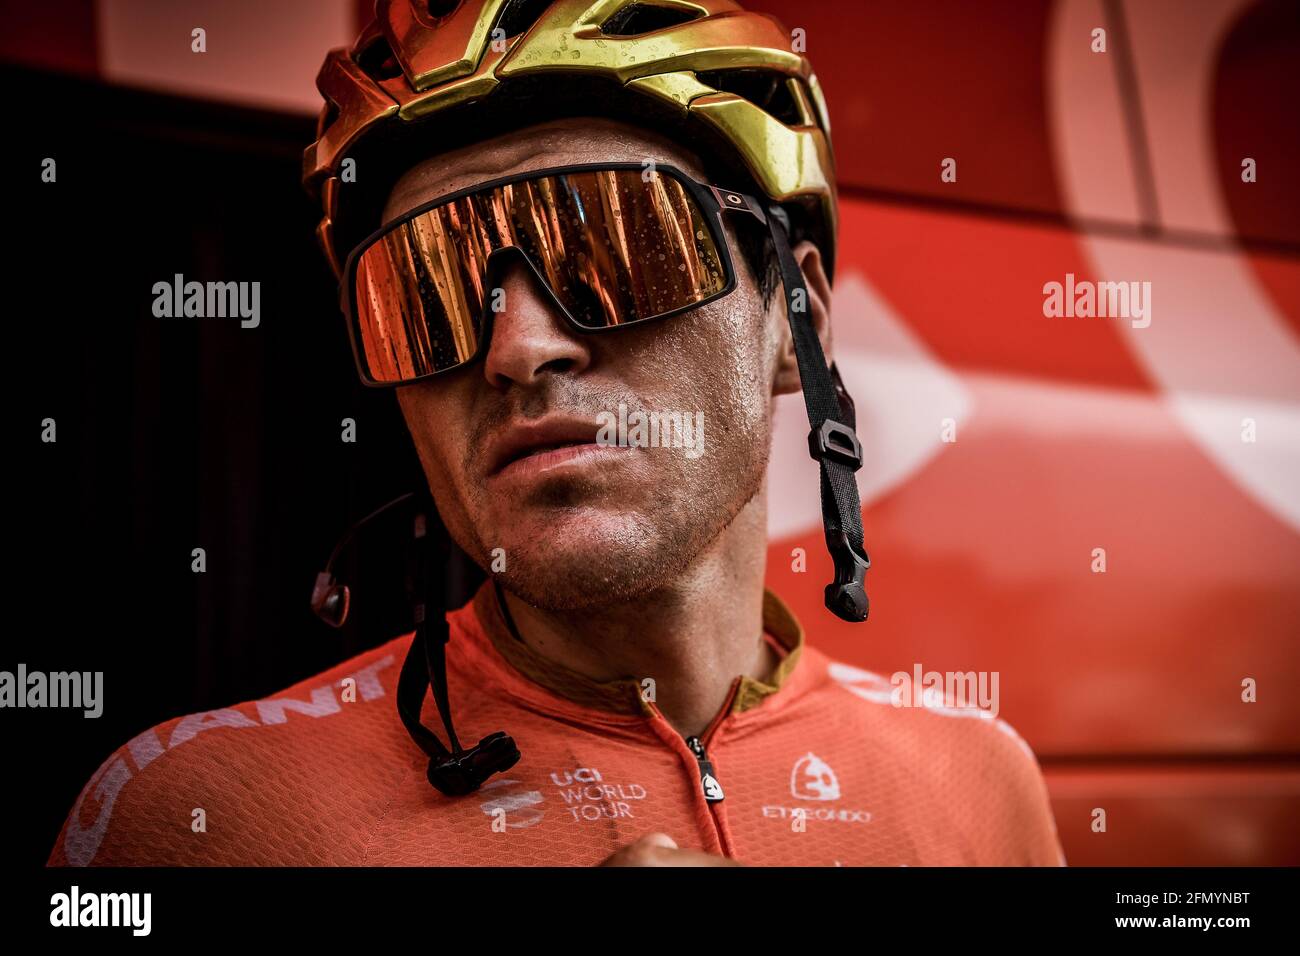 Greg Van Avermaet High Resolution Stock Photography and Images - Alamy